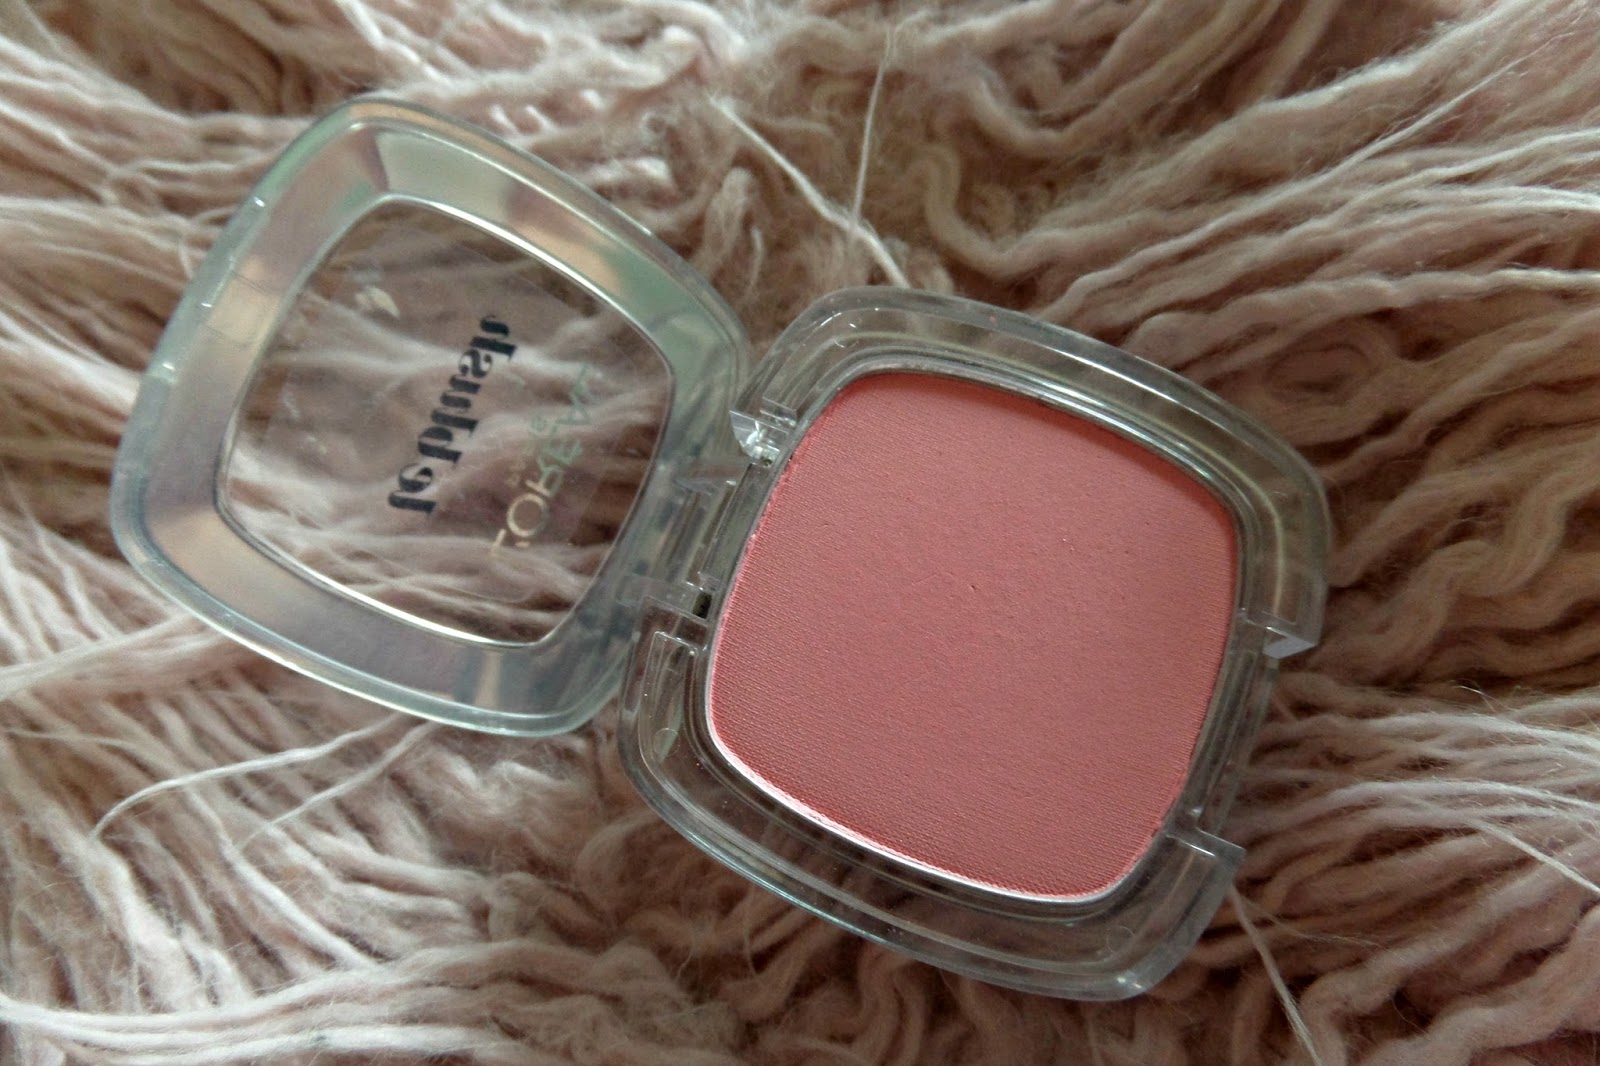 Luscious Lass 40's: Loreal Le Blush 105 Rose Pastel review and swatches